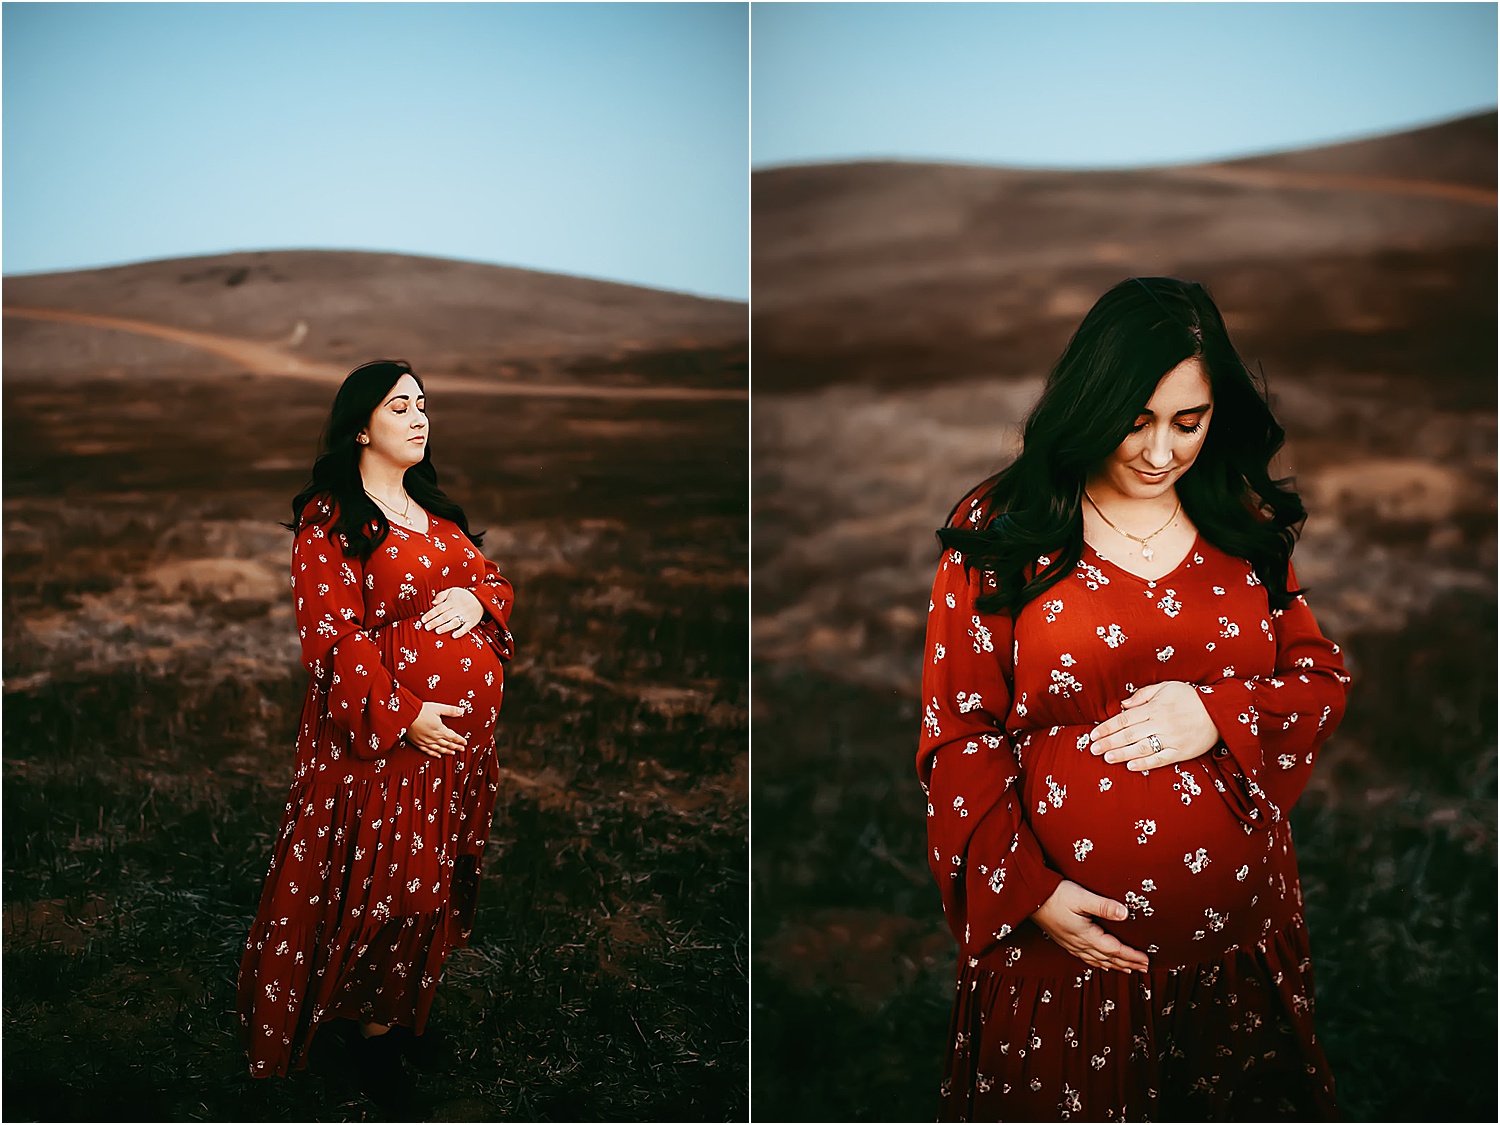 Spokane family photographer Jade averill photography captures a maternity session for a family of four